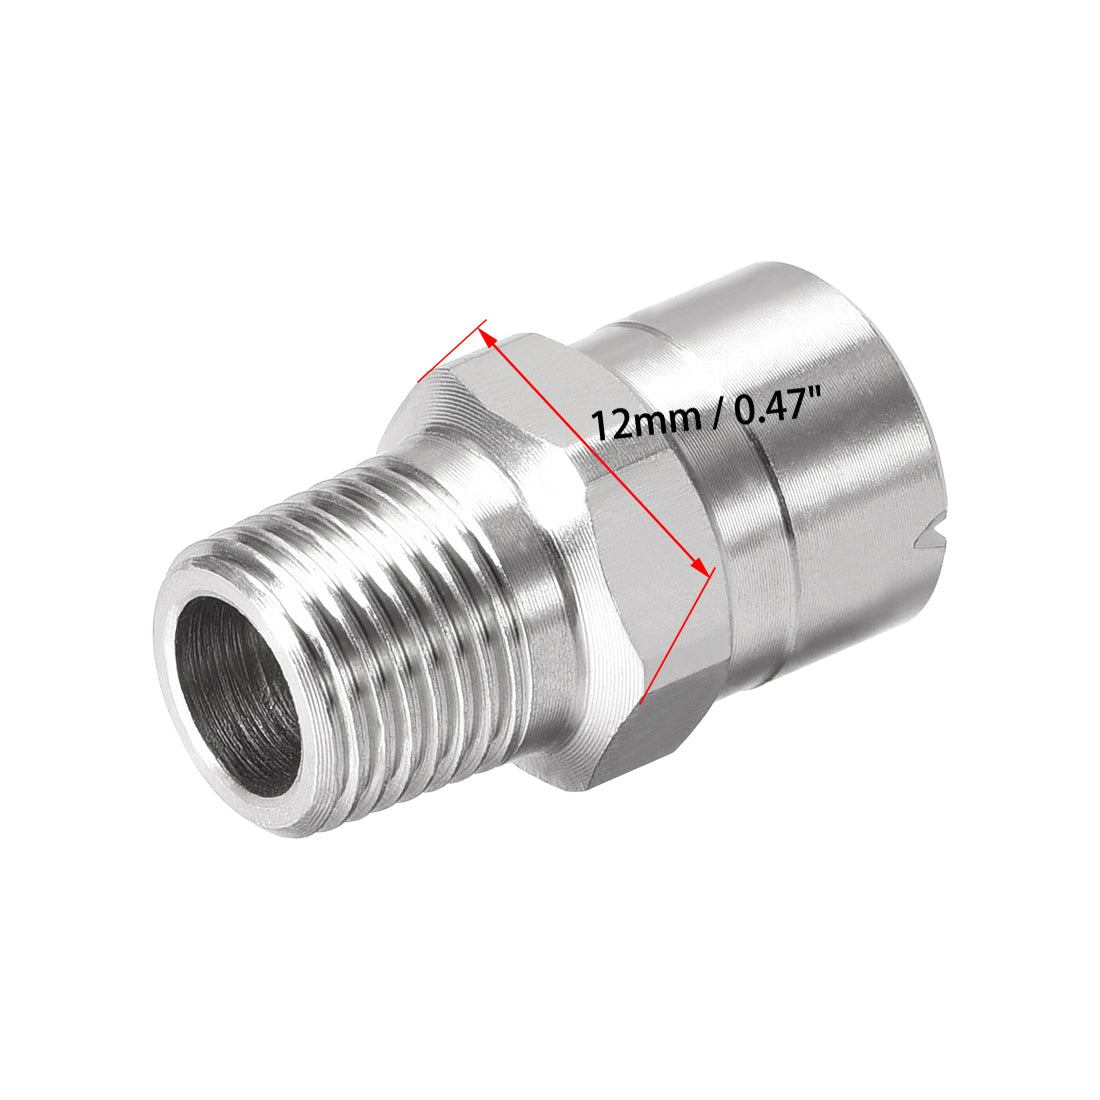 Uxcell Uxcell Flat Fan Spray Tip - 1/8BSPT Male Thread 304 Stainless Steel Nozzle - 95 Degree 1.1mm Orifice Diameter - 2 Pcs